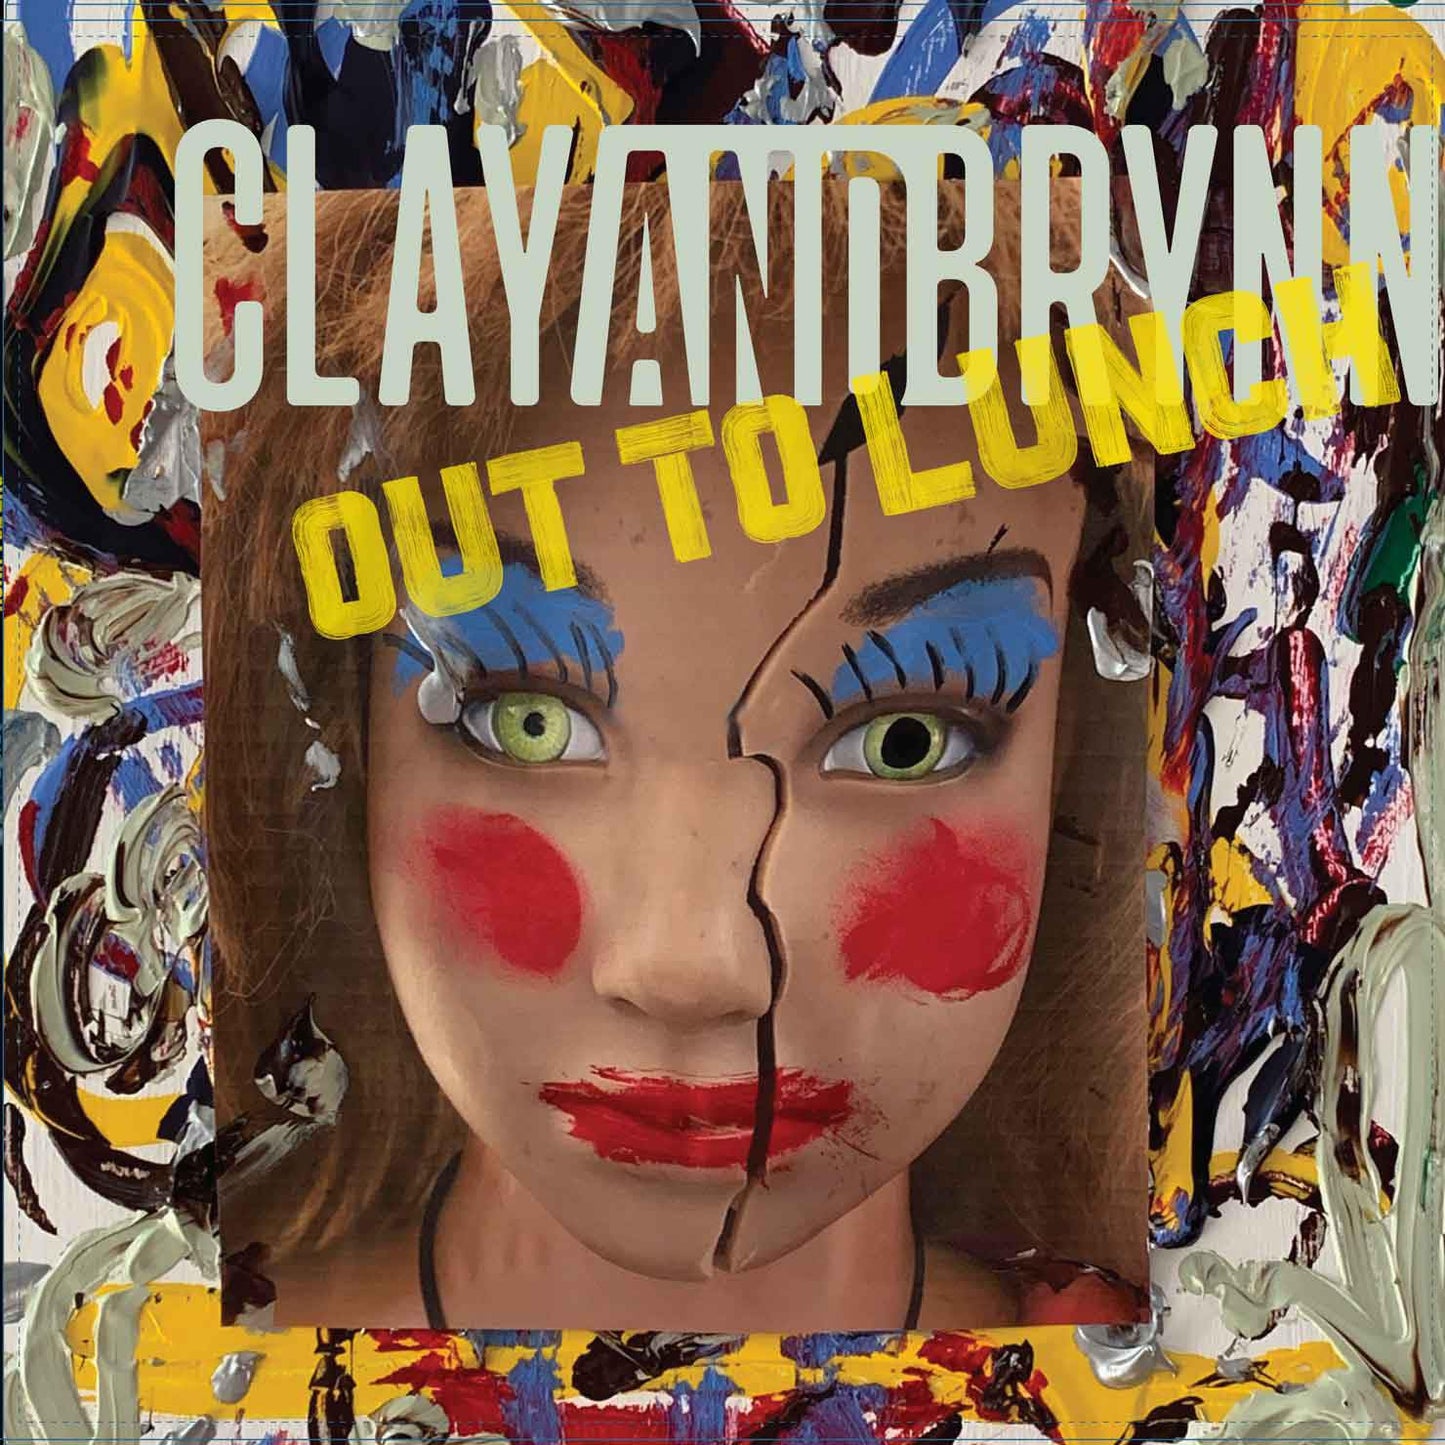 Clay and Brynn, "Out to Lunch" [10"] (Yellow Vinyl)